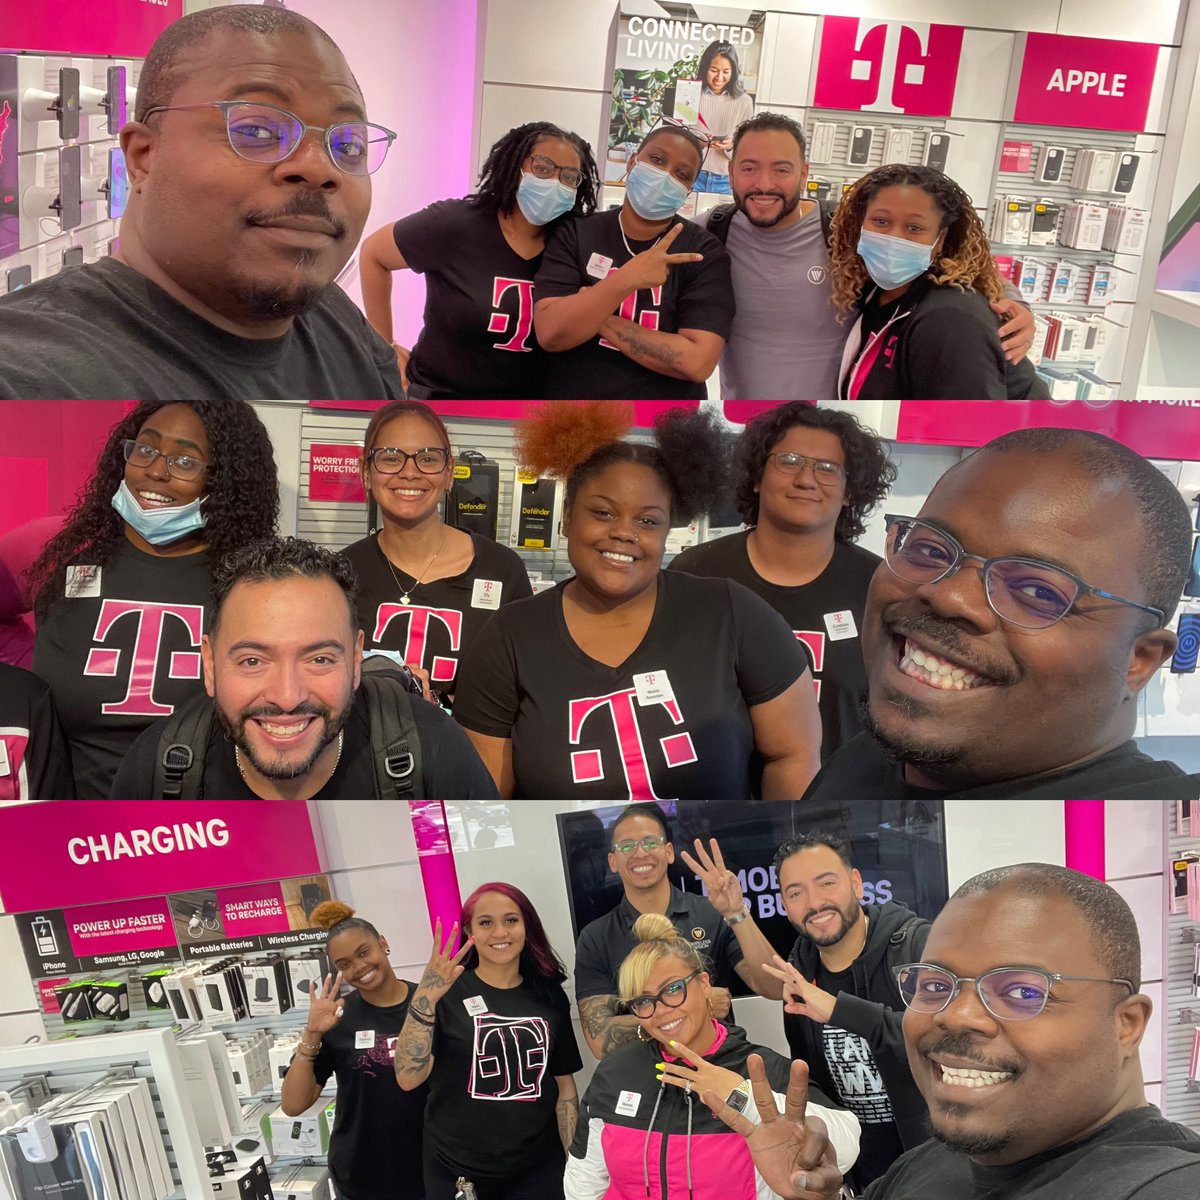 I just wanted to thank @dzepol78 for coming out to see what we have been working on in Atlanta. Thank you for the time and reinforcement of the message. Making peoples lives better as we pursue growth & greatness! #simplybetter